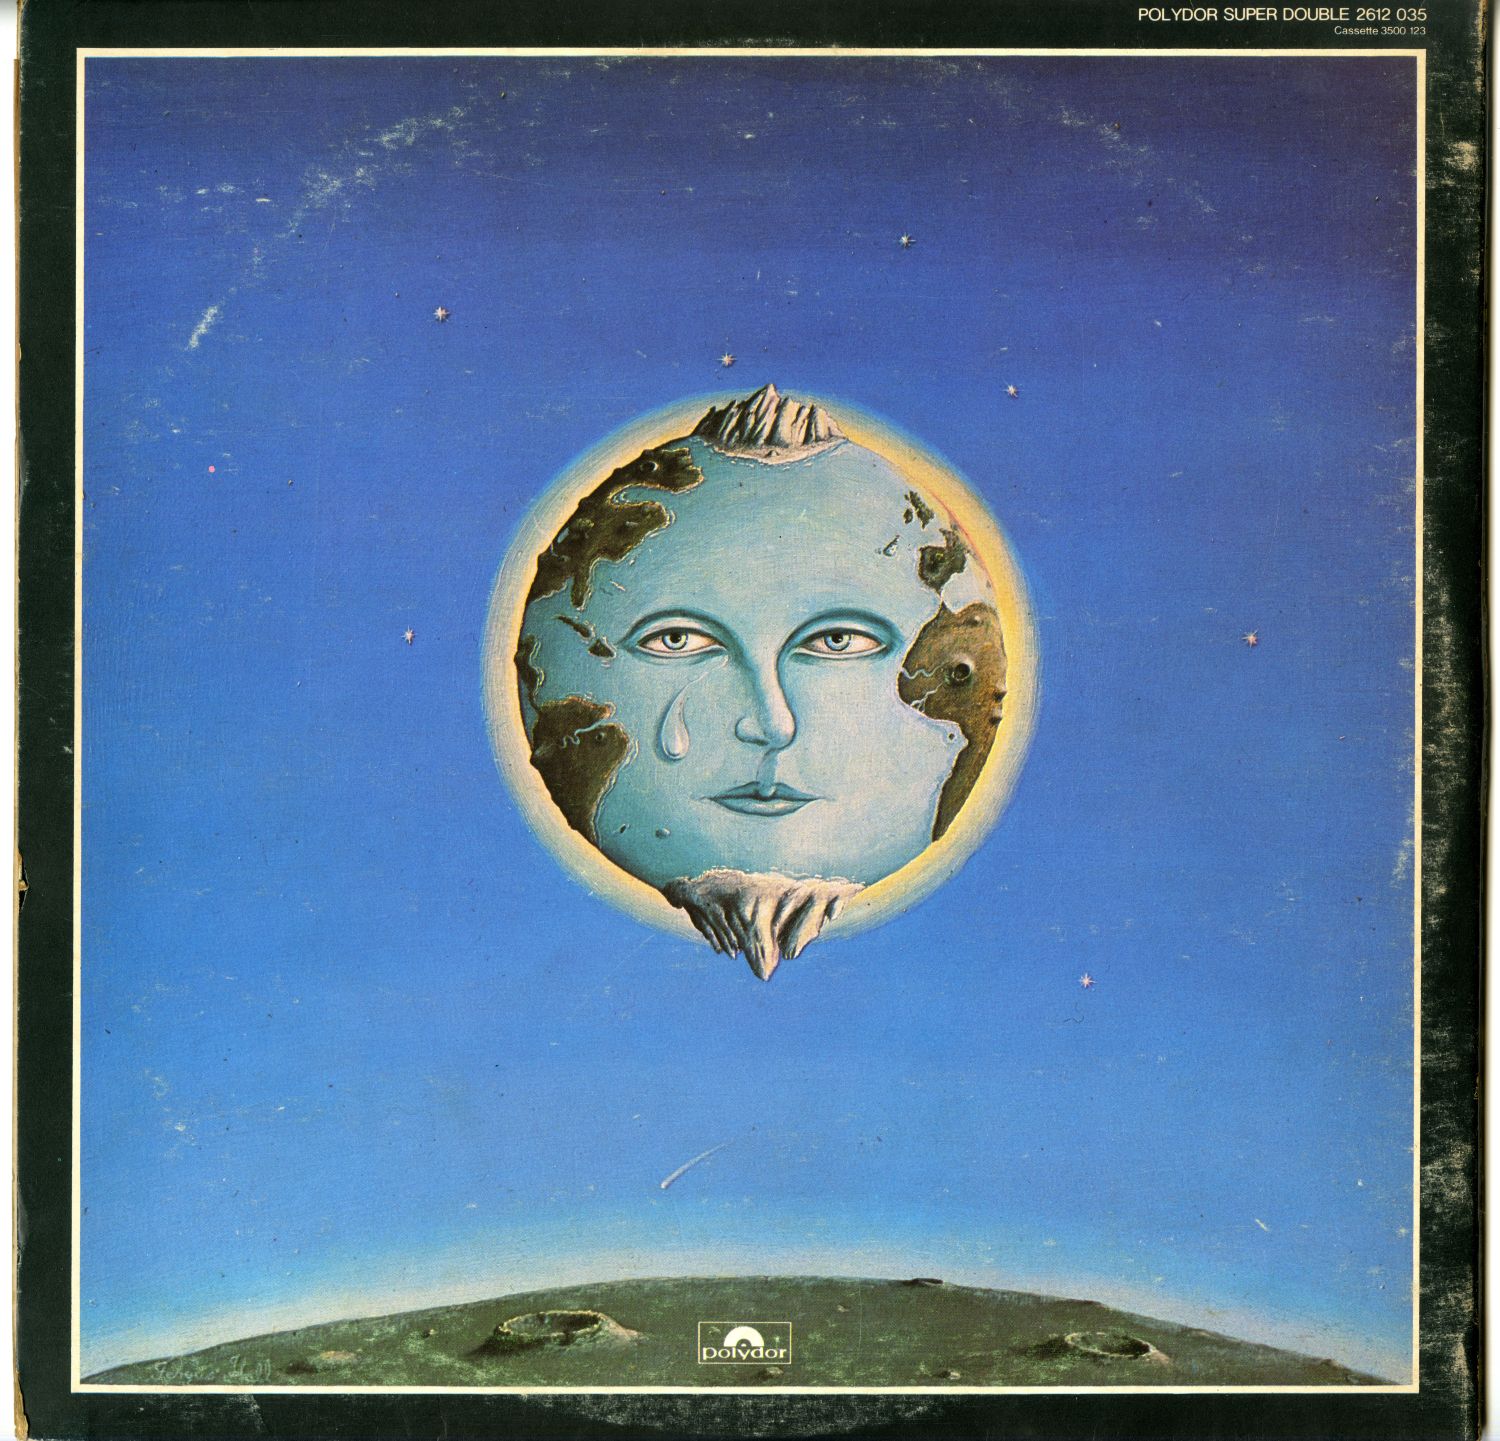 『The Young Persons' Guide To King Crimson』（1975年）ジャケット02